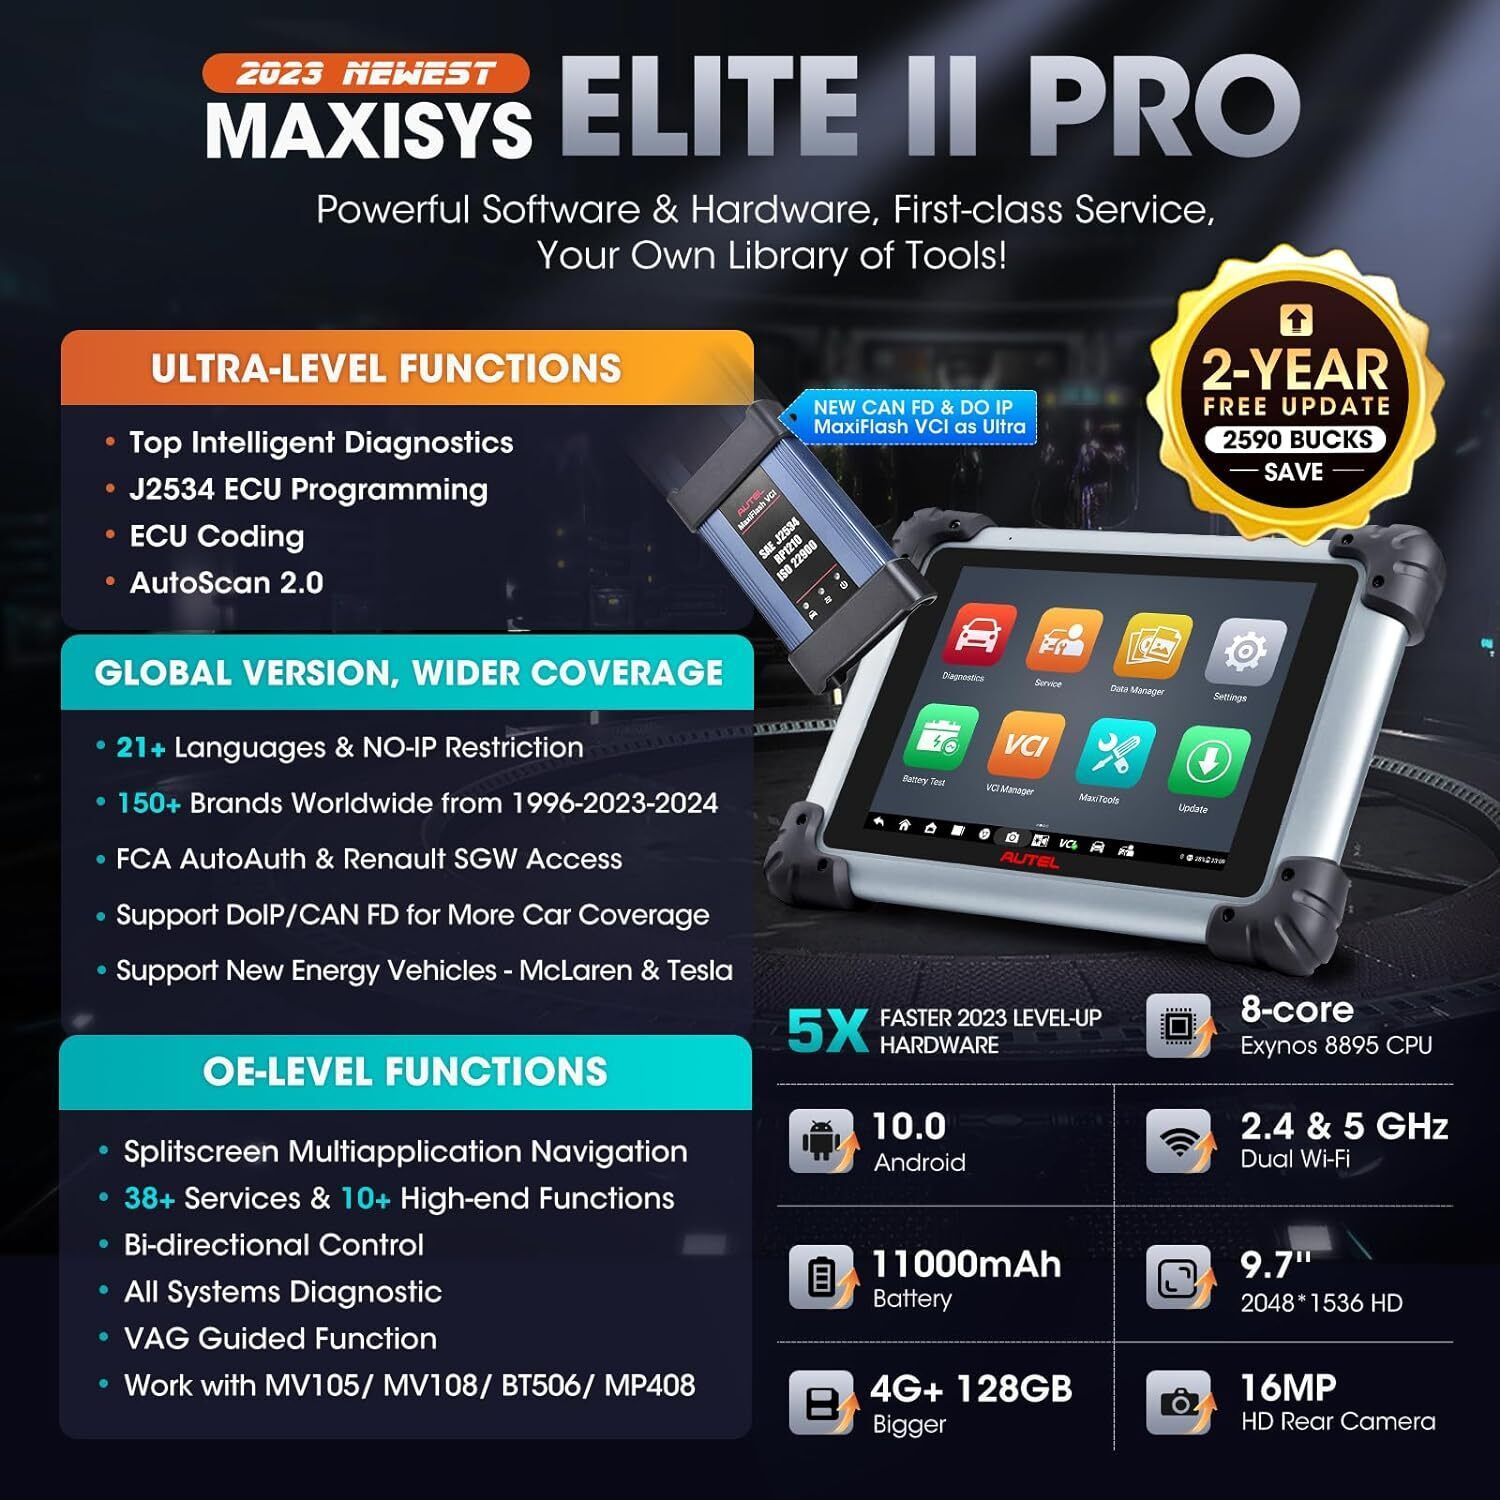 Autel MaxiSys Elite II Pro Automotive Diagnostic Scanner Intelligent Diagnostic 2.0, 40+ Services, CAN FD & DoIP, J2534 Programming Coding, 2-Year Free Update New Ver. of Ultra/ MS919/ MS909 - image 2 of 9